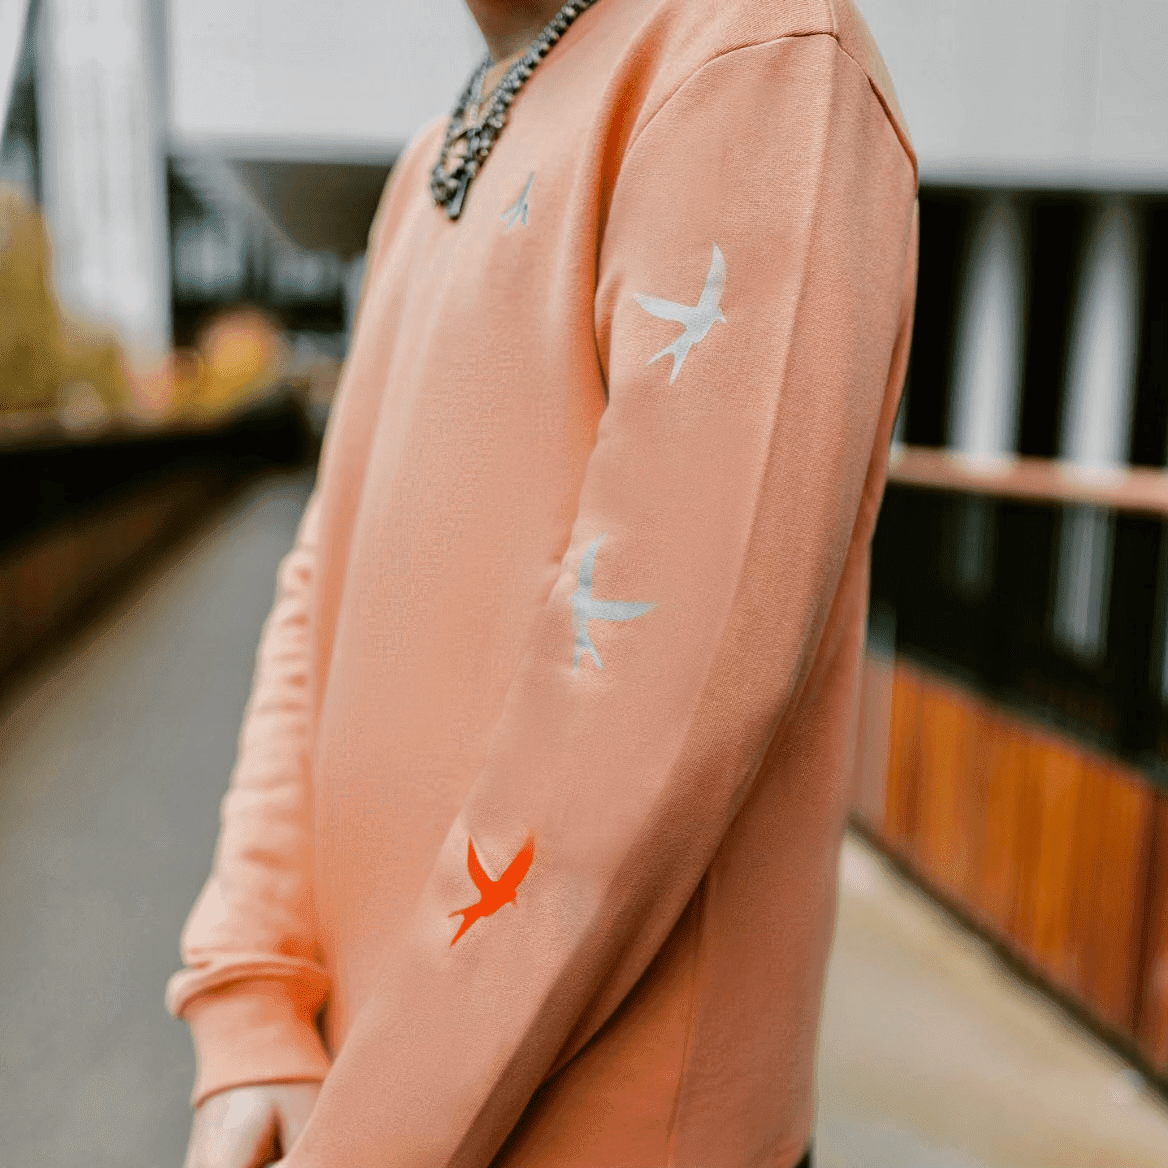 h clothing - close up of male model wearing pastel orange sweatshirt with blue h logo and colourful birds going down left arm